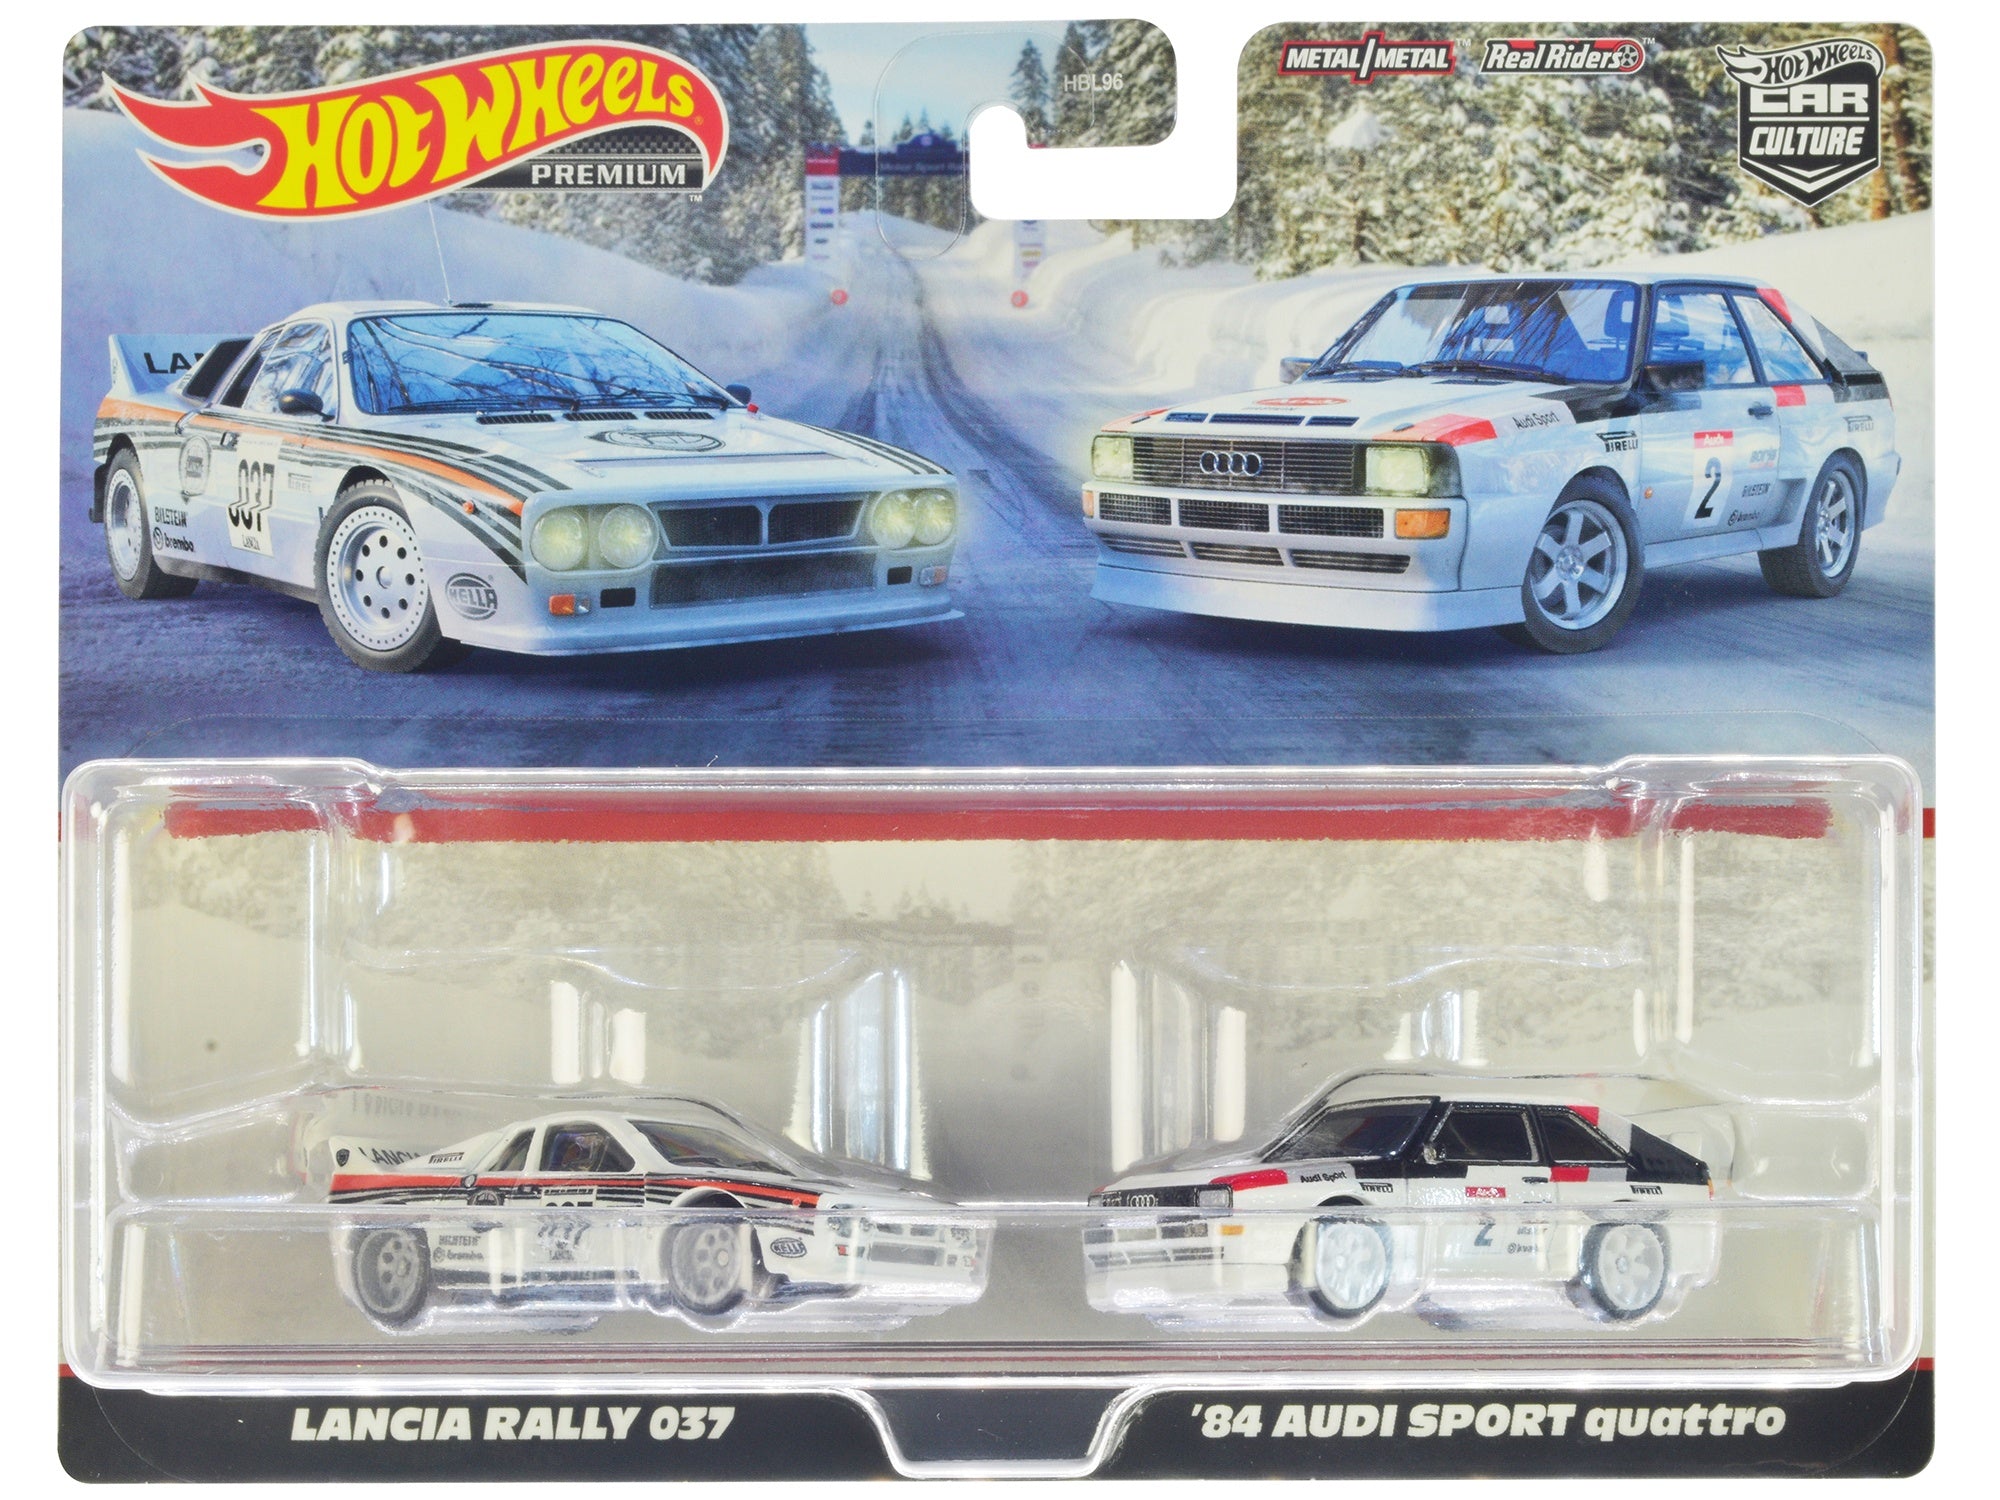 Lancia Rally 037 #037 White with Stripes and 1984 Audi Sport Quattro #2 White "Car Culture" Set of 2 Cars Diecast Model Cars by Hot Wheels Hotwheels